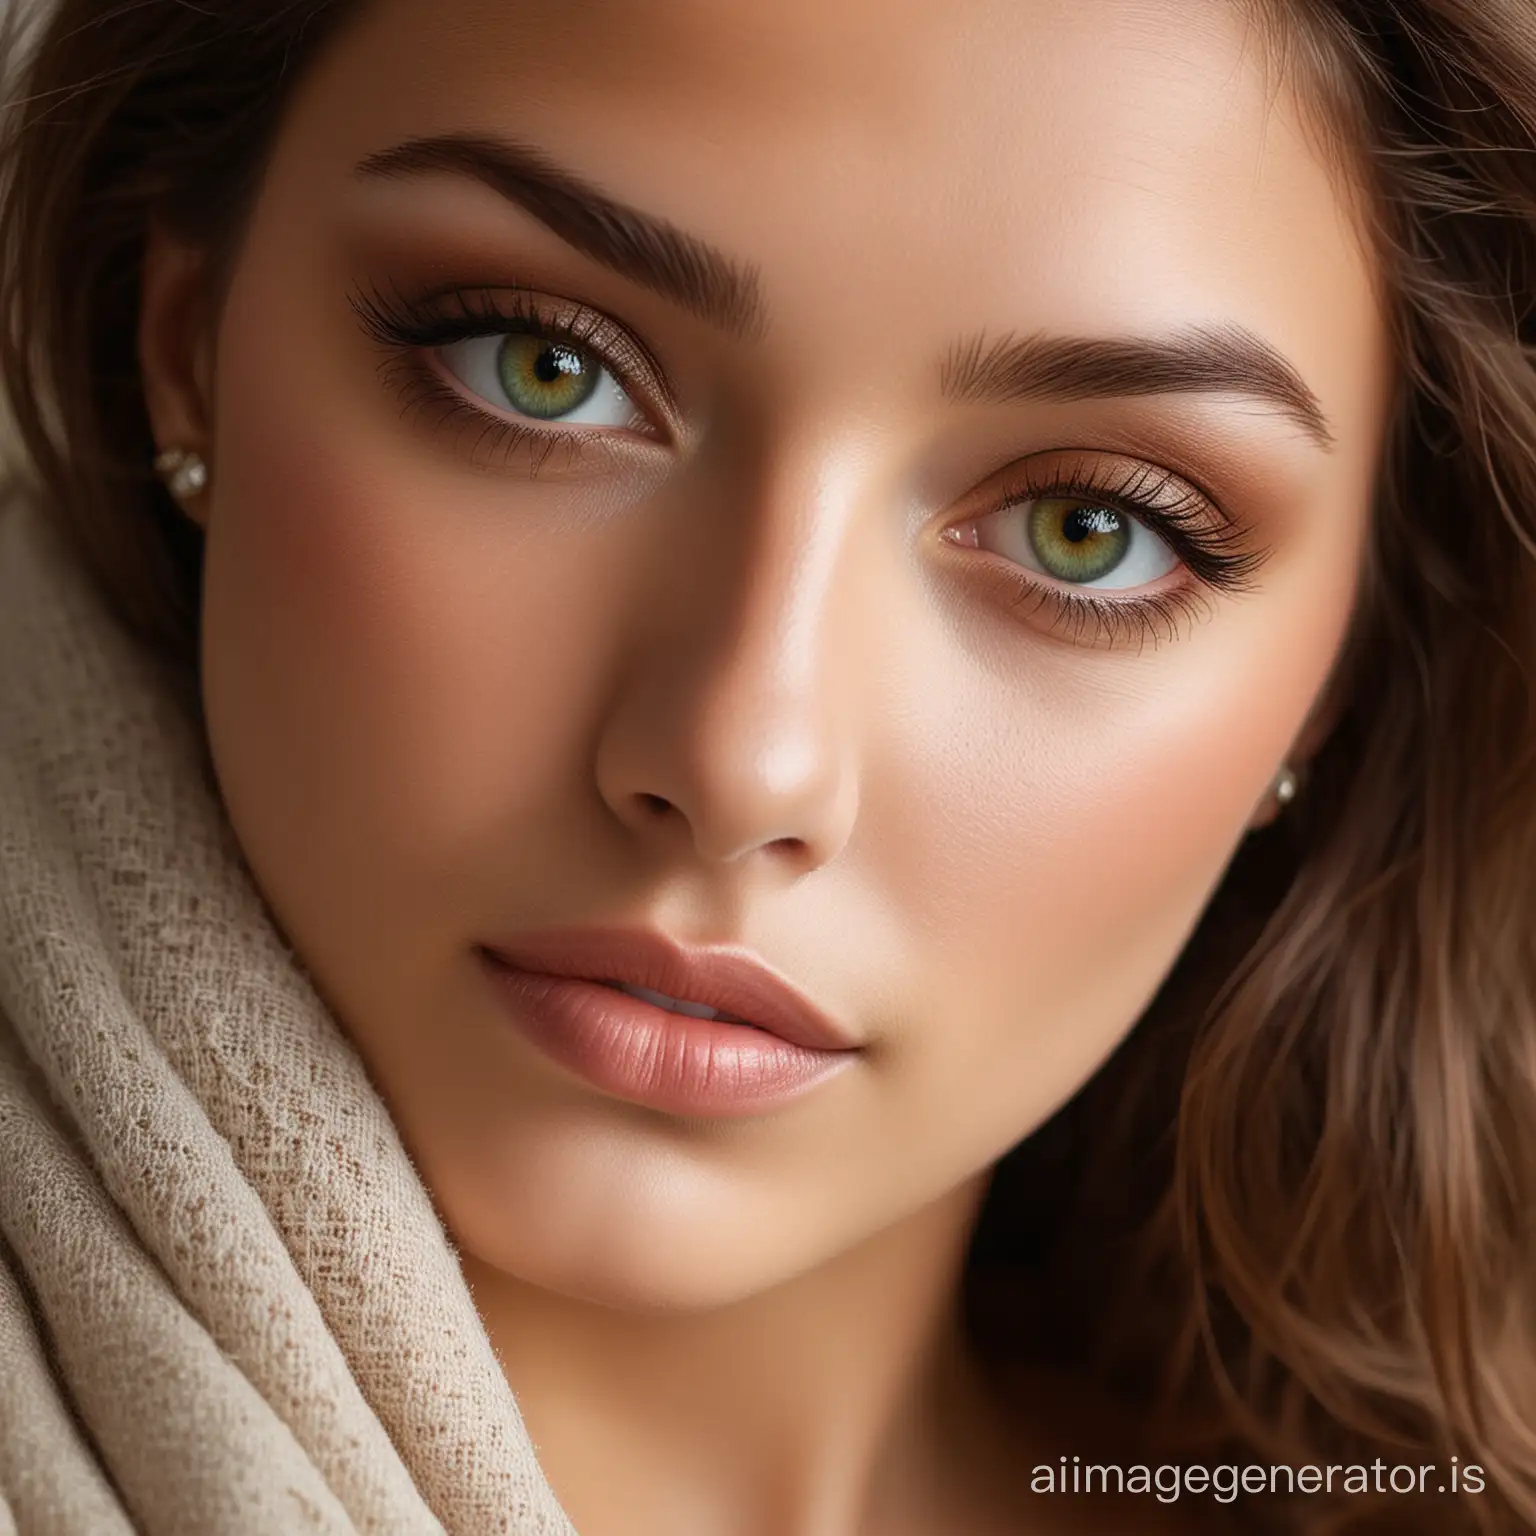 Captivating-HazelEyed-Woman-Graceful-Beauty-with-Inner-Strength-and-Wisdom